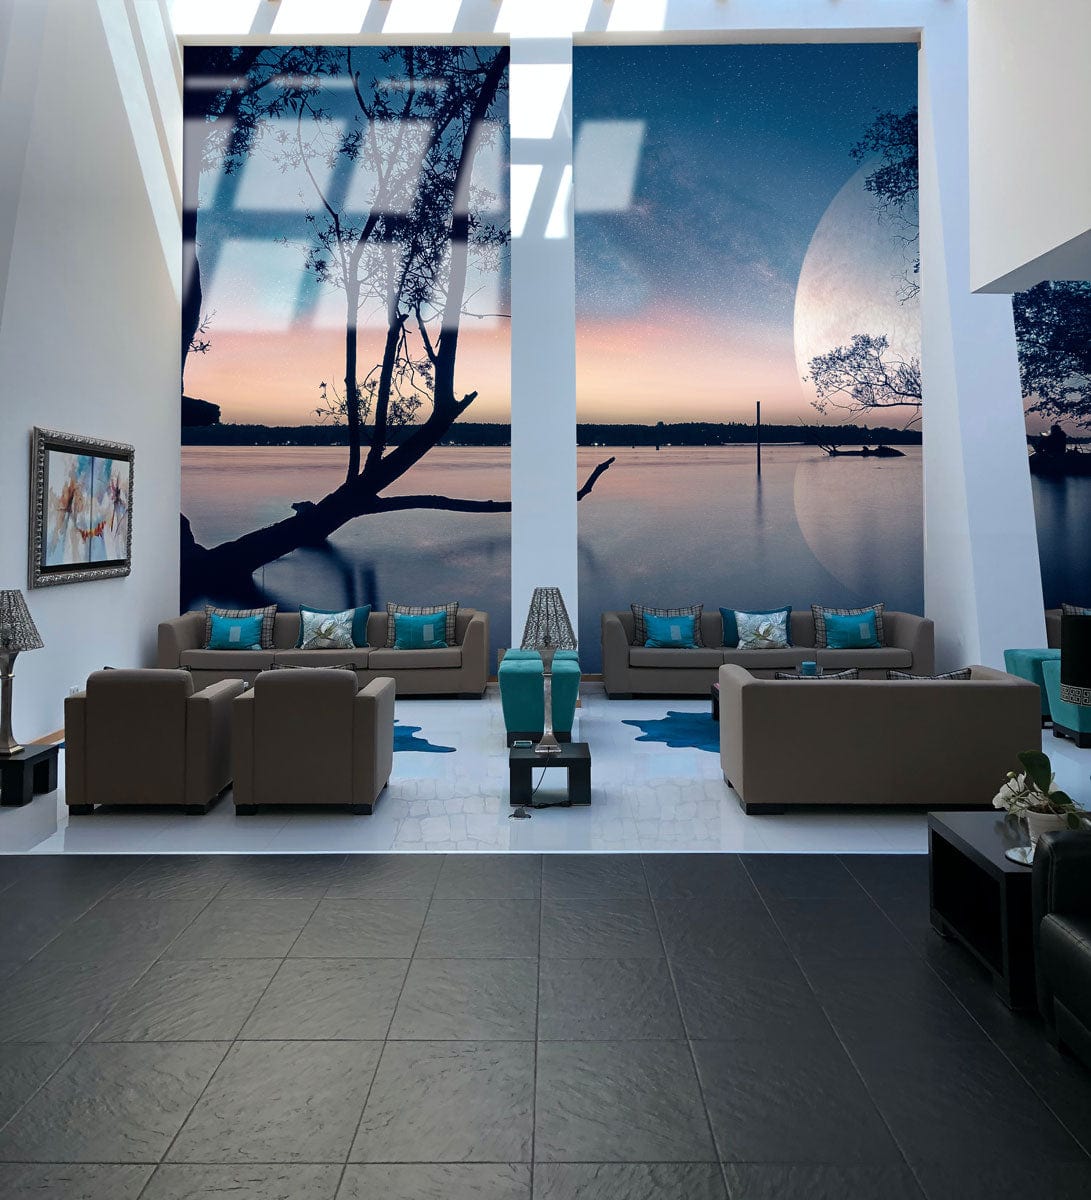 Wallpaper mural with a mystical night sky, perfect for decorating the living room.